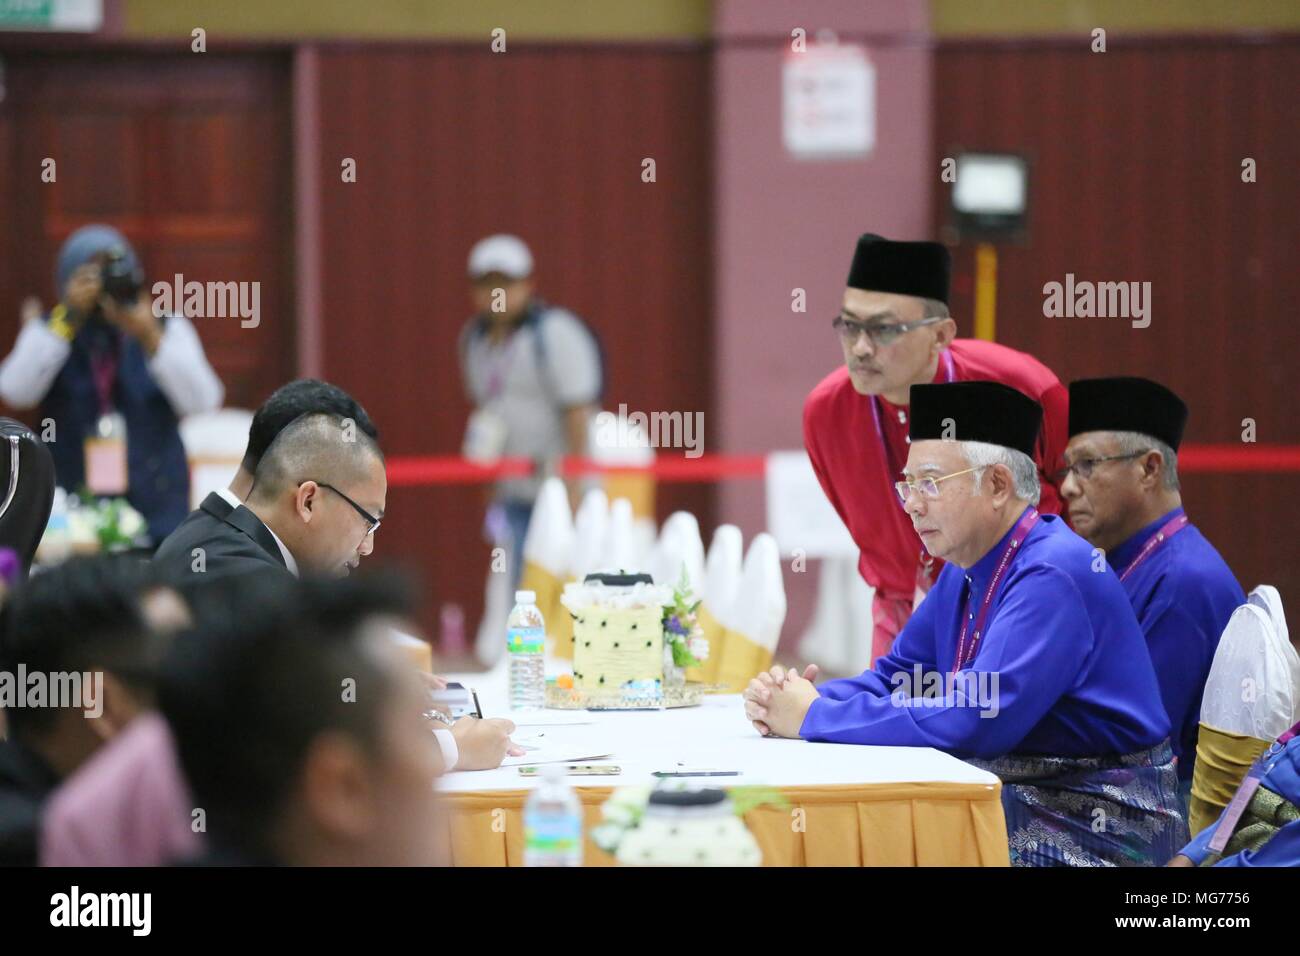 Pekan, Malaysia. 28th Apr, 2018. Malaysian caretaker Prime Minister Najib Razak(2nd R) submits the nomination paper for the upcoming general election in Pekan in eastern state of Pahang, Malaysia, on April 28, 2018. Candidates contesting the Malaysian general election submitted their nomination papers on Saturday morning, formally kicking off an 11-day election campaign in which the ruling Barisan Nasional (BN) coalition, led by caretaker Prime Minister Najib Razak, is seeking a new mandate. Credit: Zhu Wei/Xinhua/Alamy Live News Stock Photo